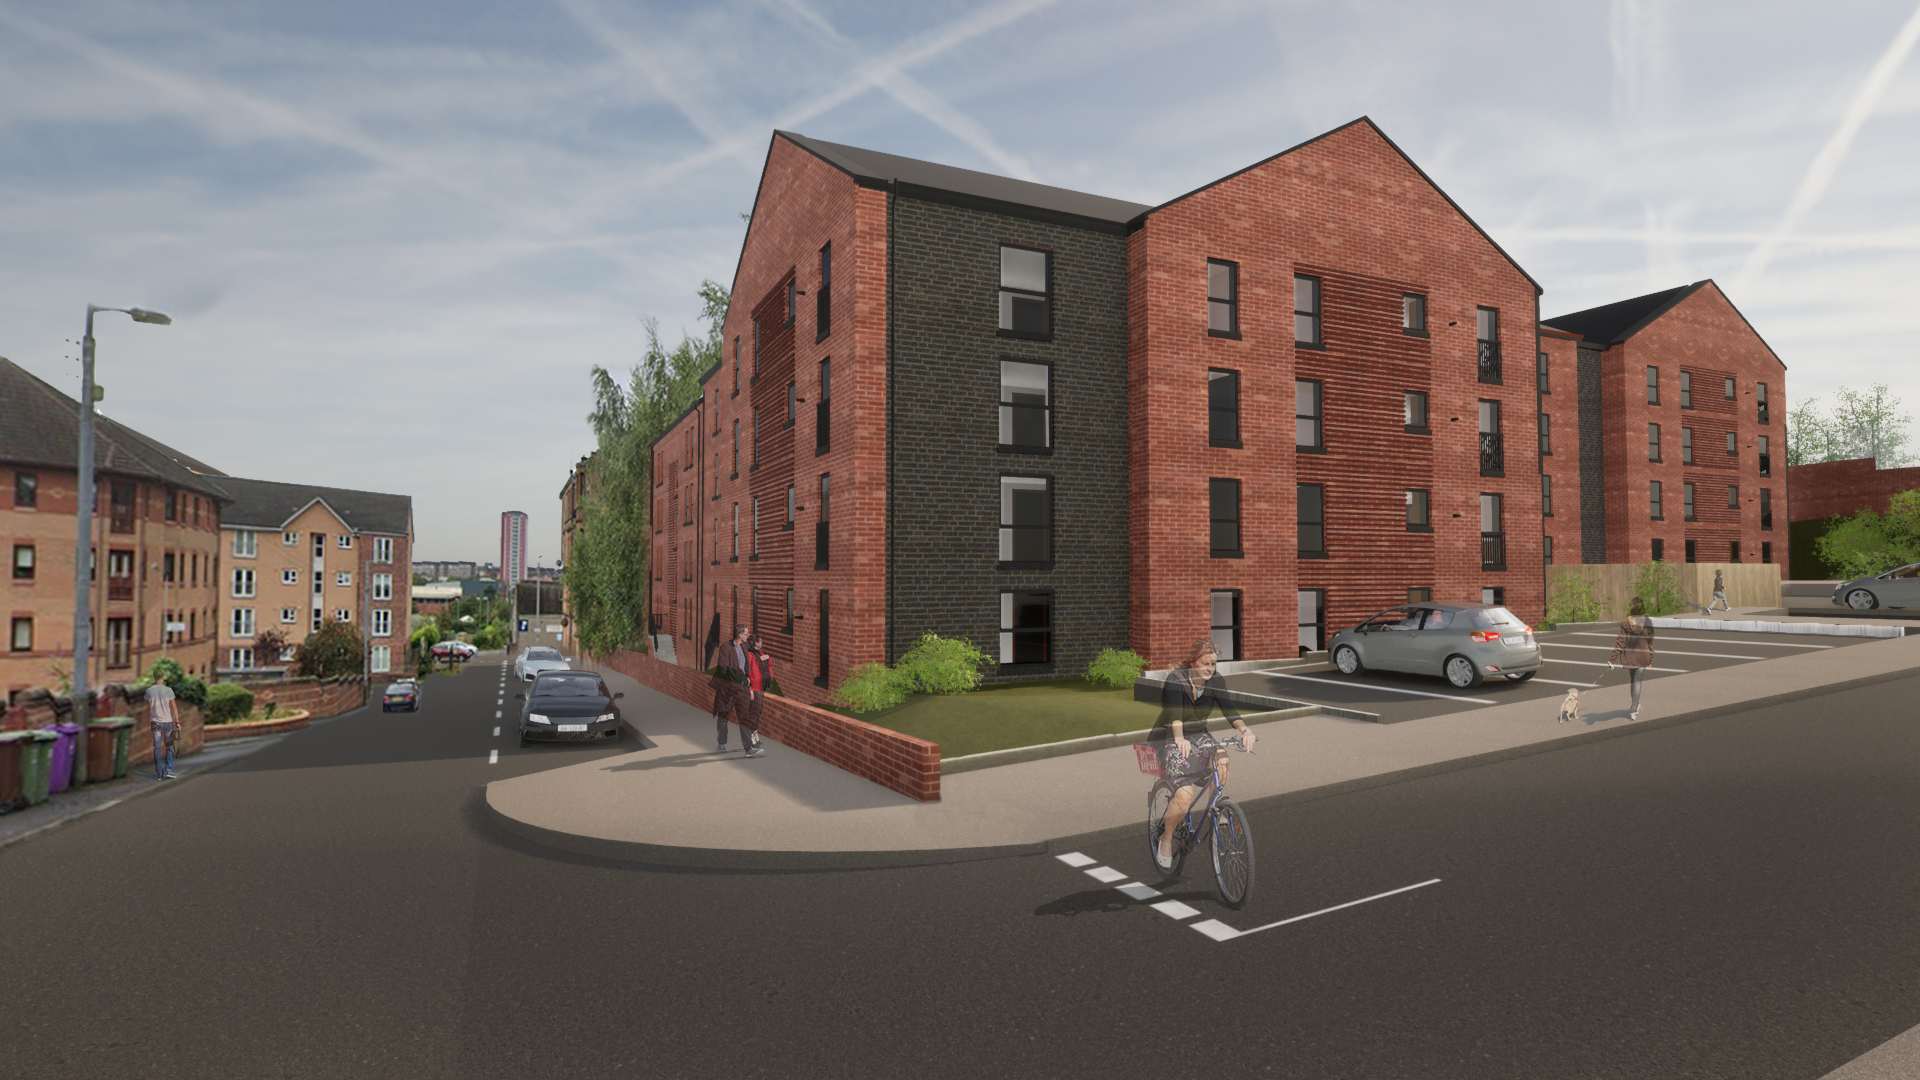 55 homes for social rent planned at former Glasgow football ground